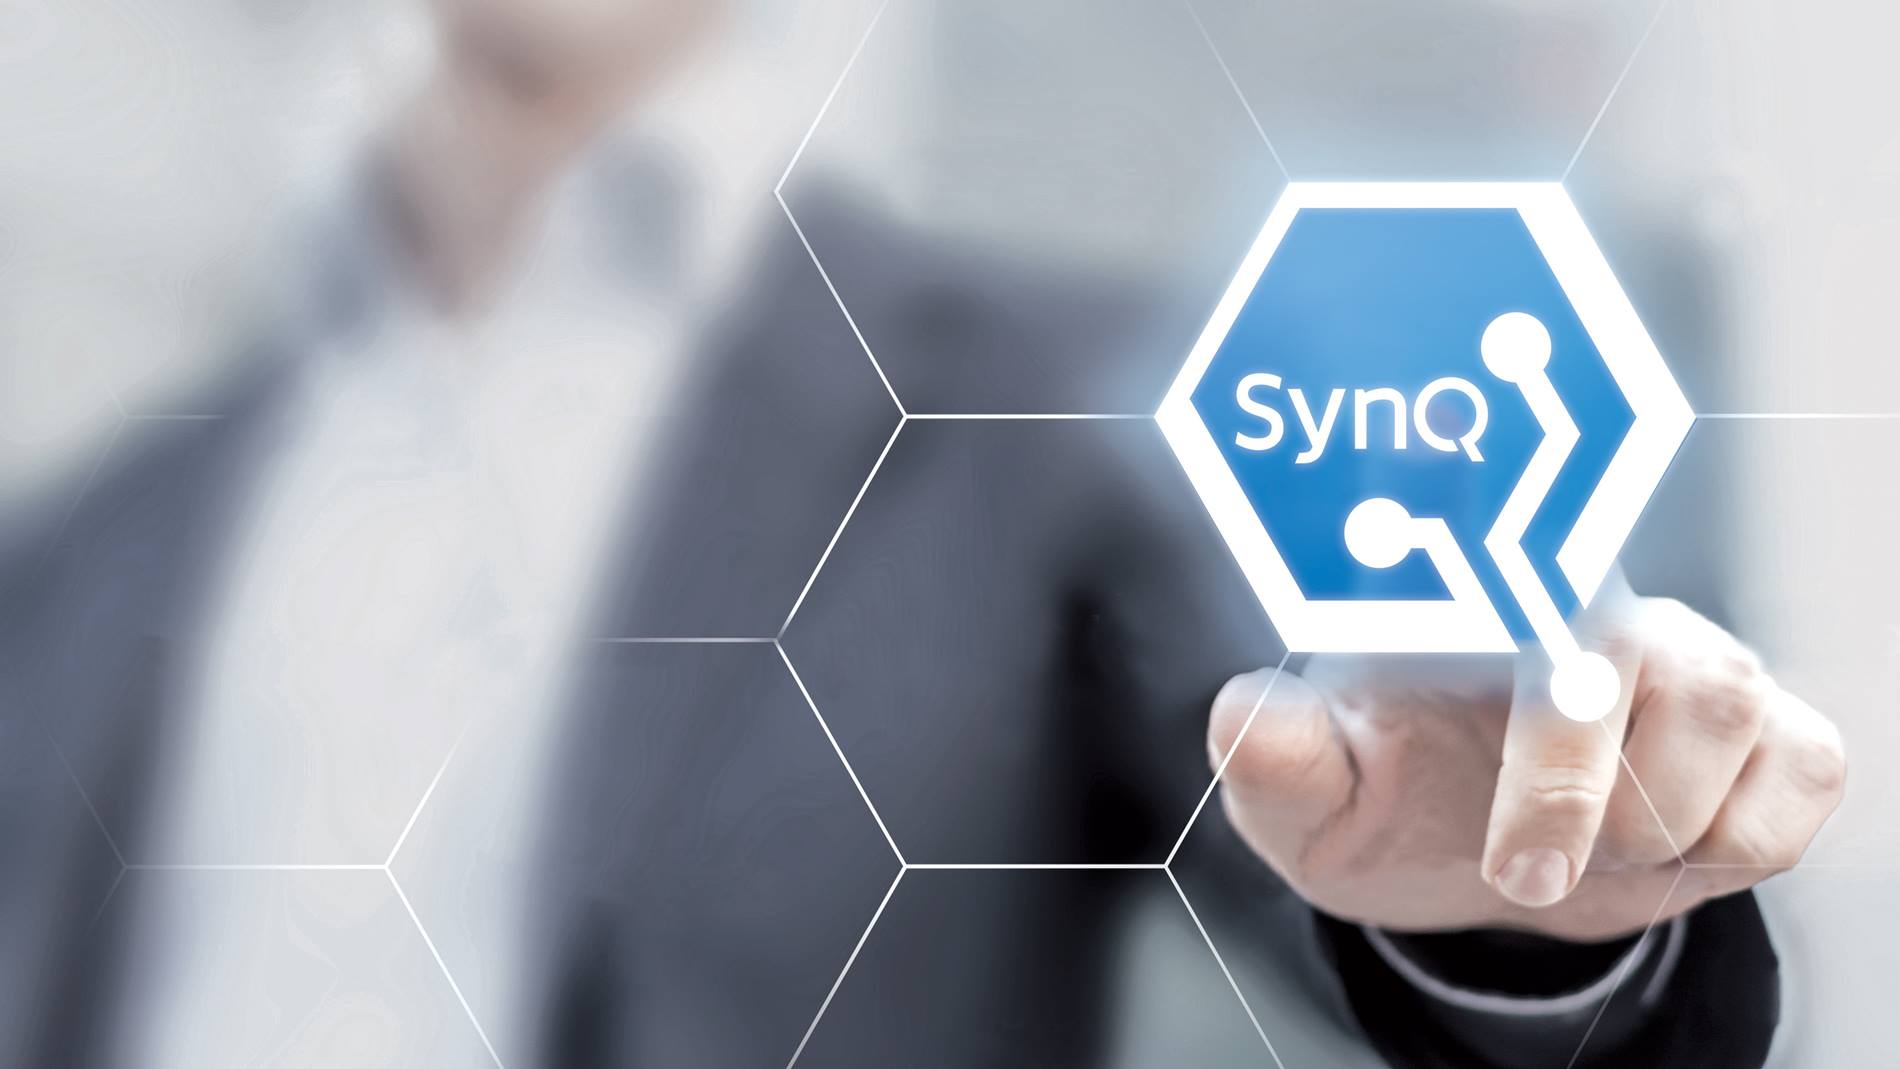 Introducing the SynQ Intelligence Network Designed to Give You the Flexibility and Intelligence to Adapt to Change